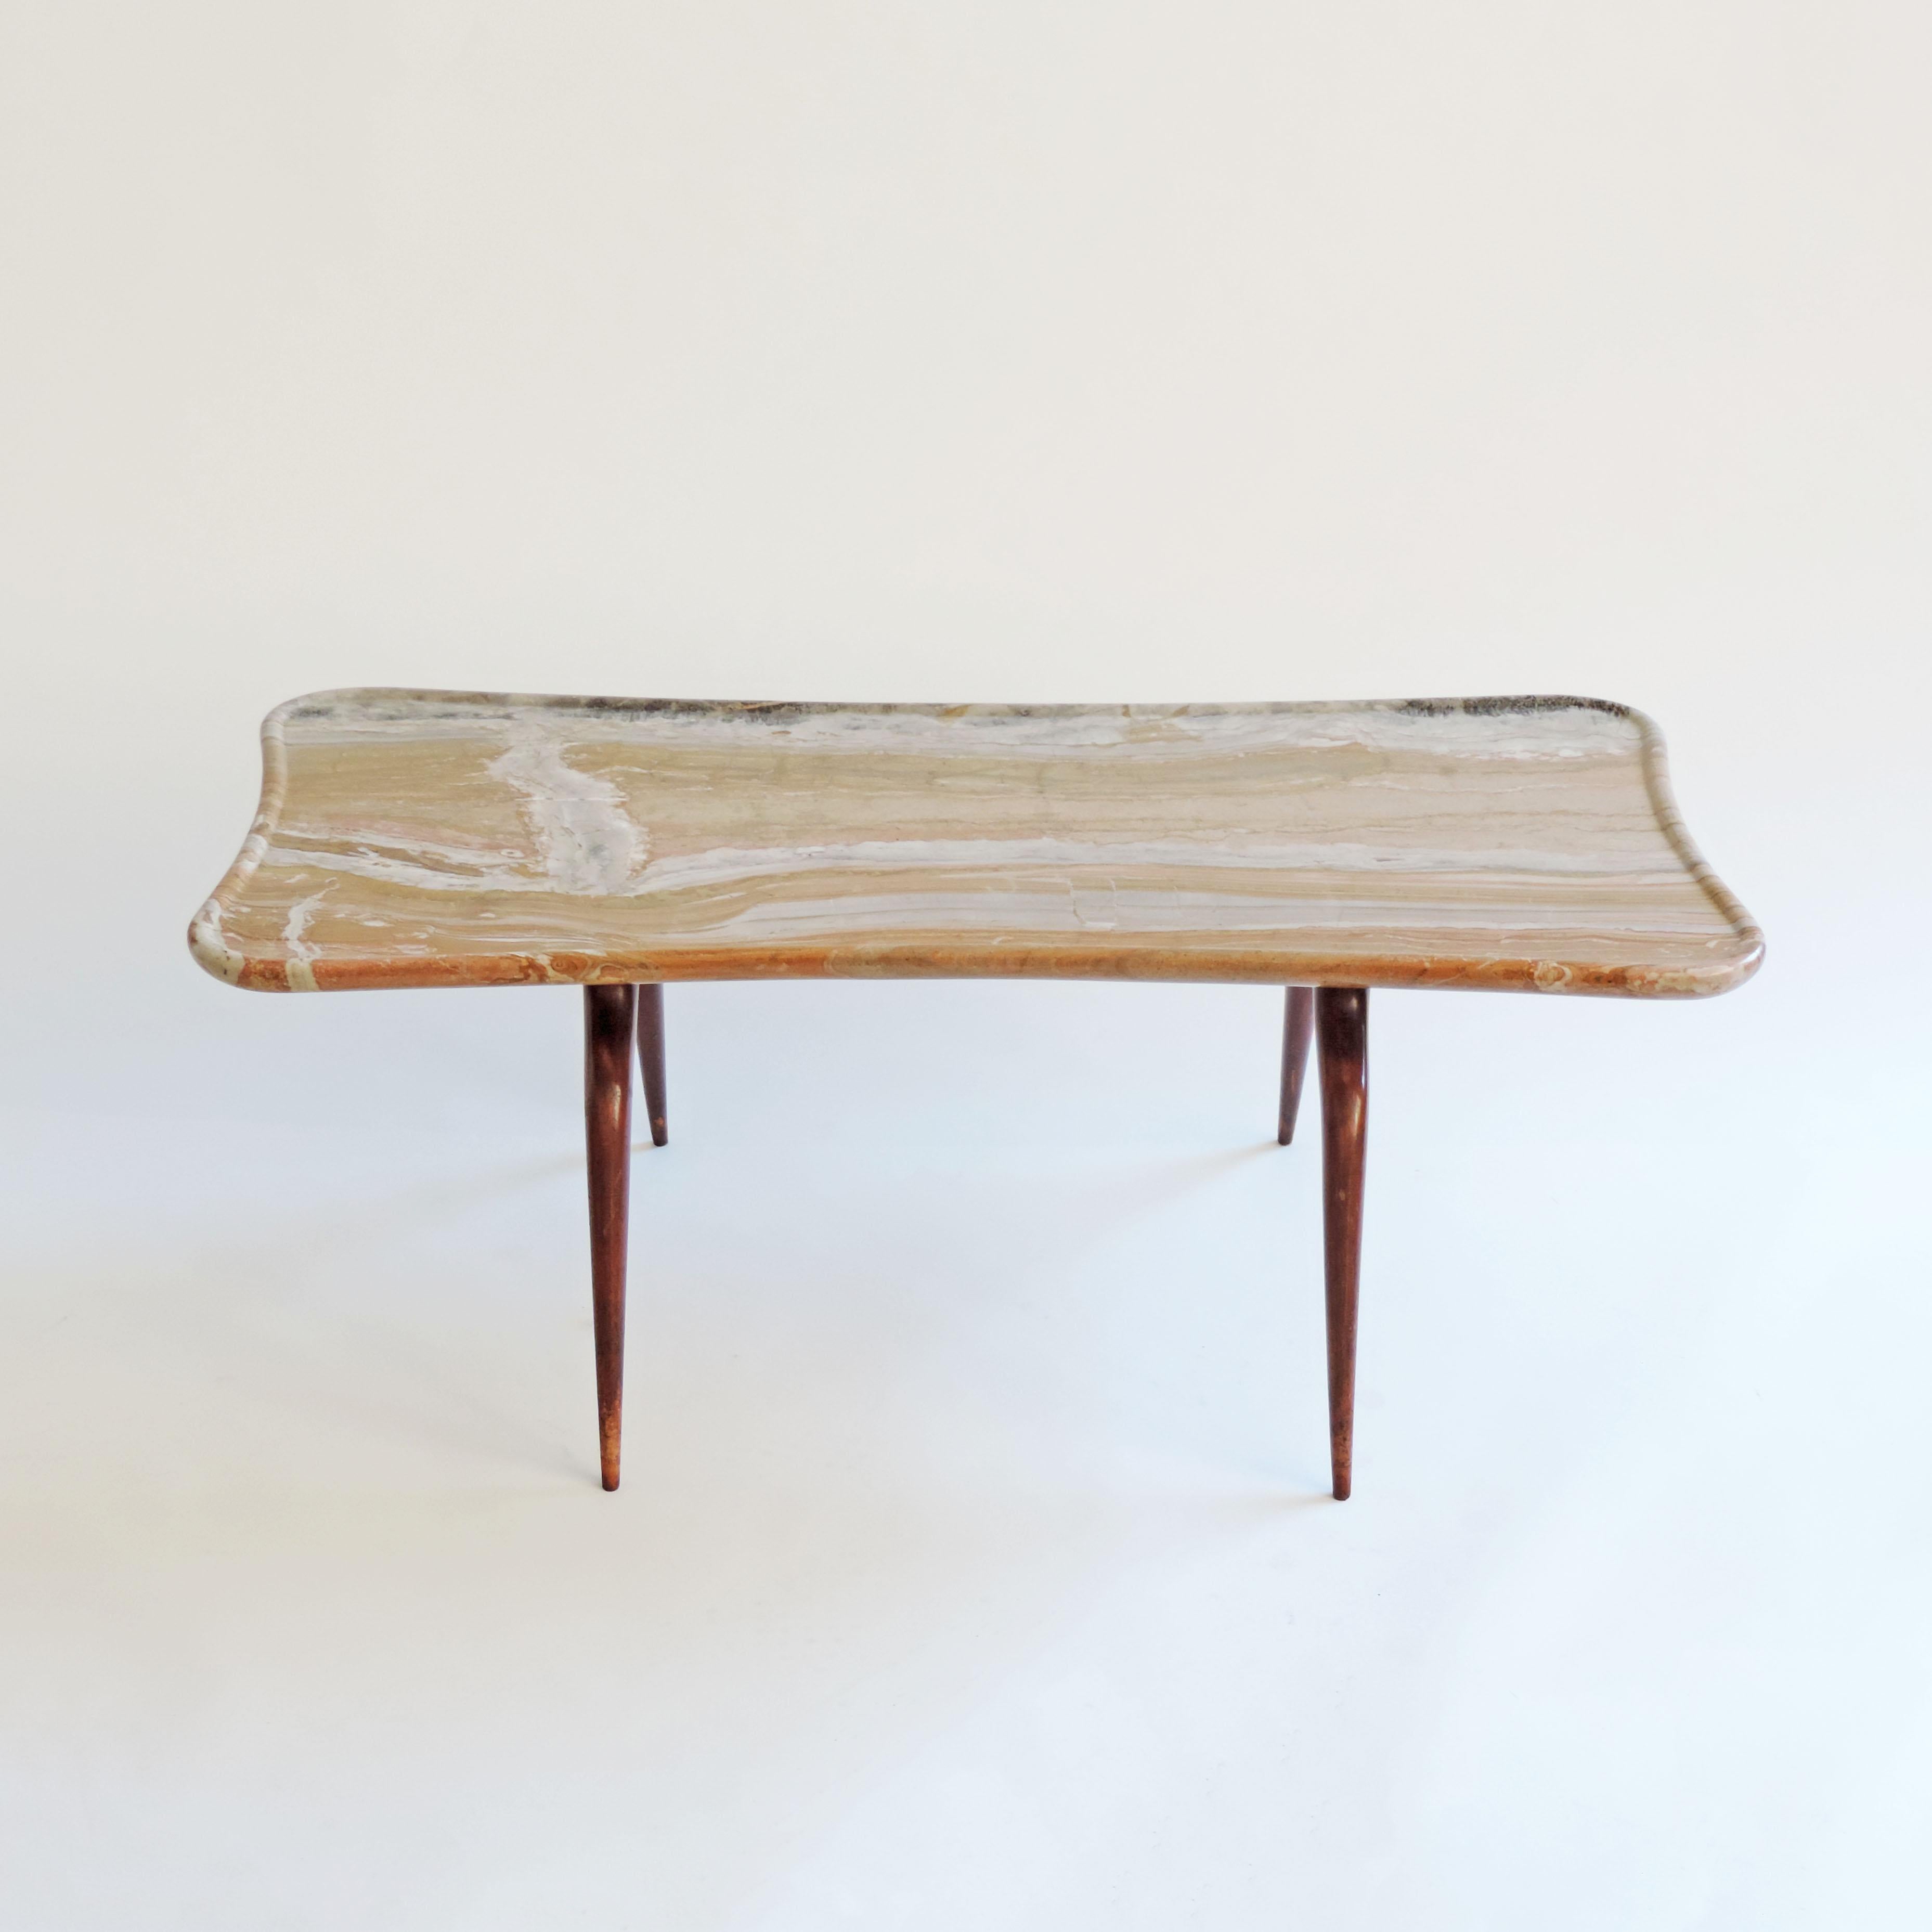 Surrealist Fabrizio Clerici Coffee Table in Wood and Marble, Italy, 1940s For Sale 4